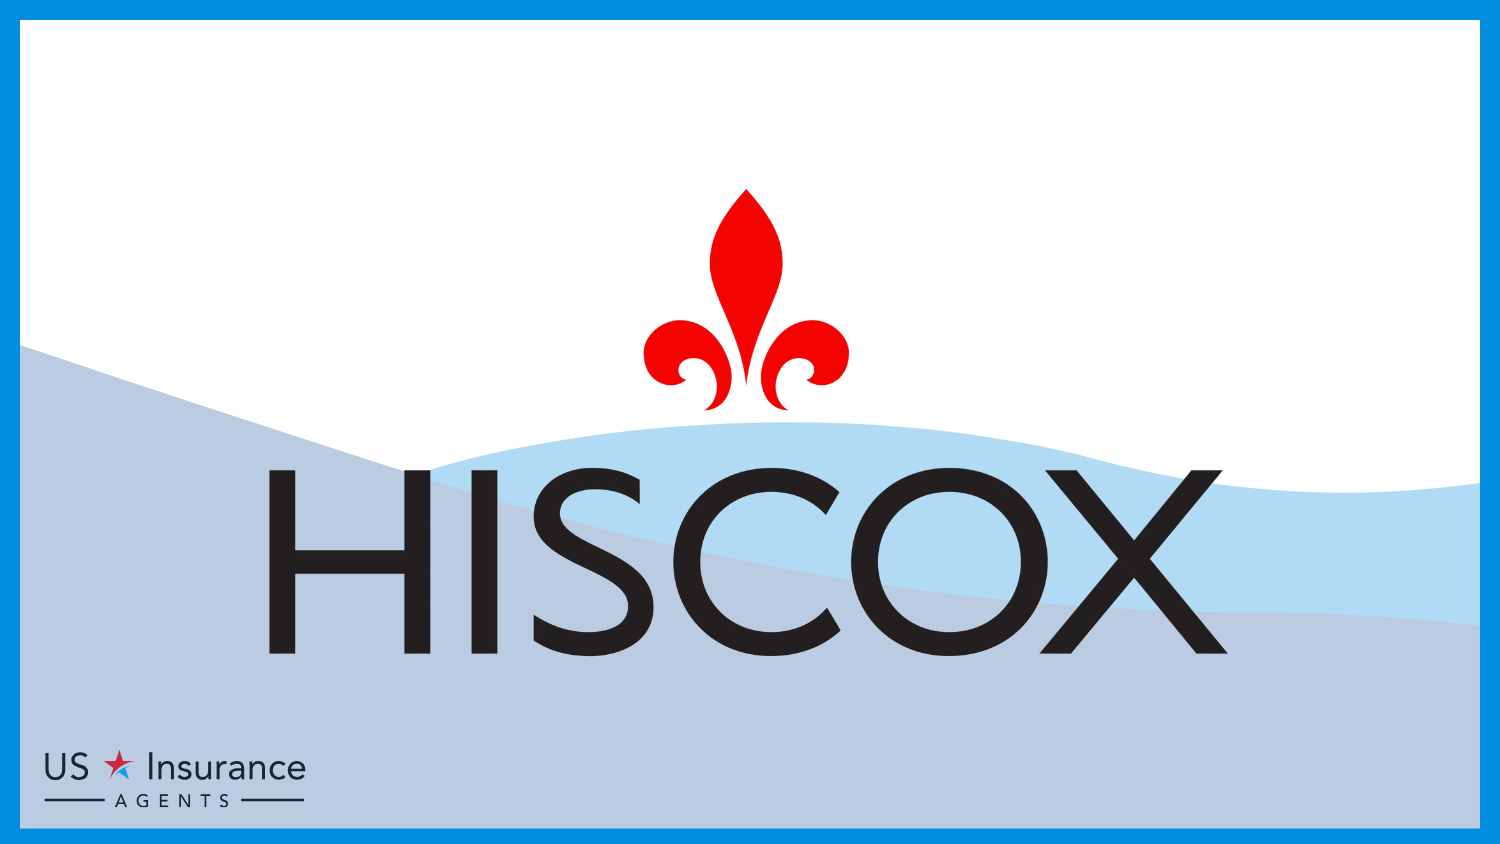 Hiscox: Best Business Insurance for Biotech and Life Science Firms